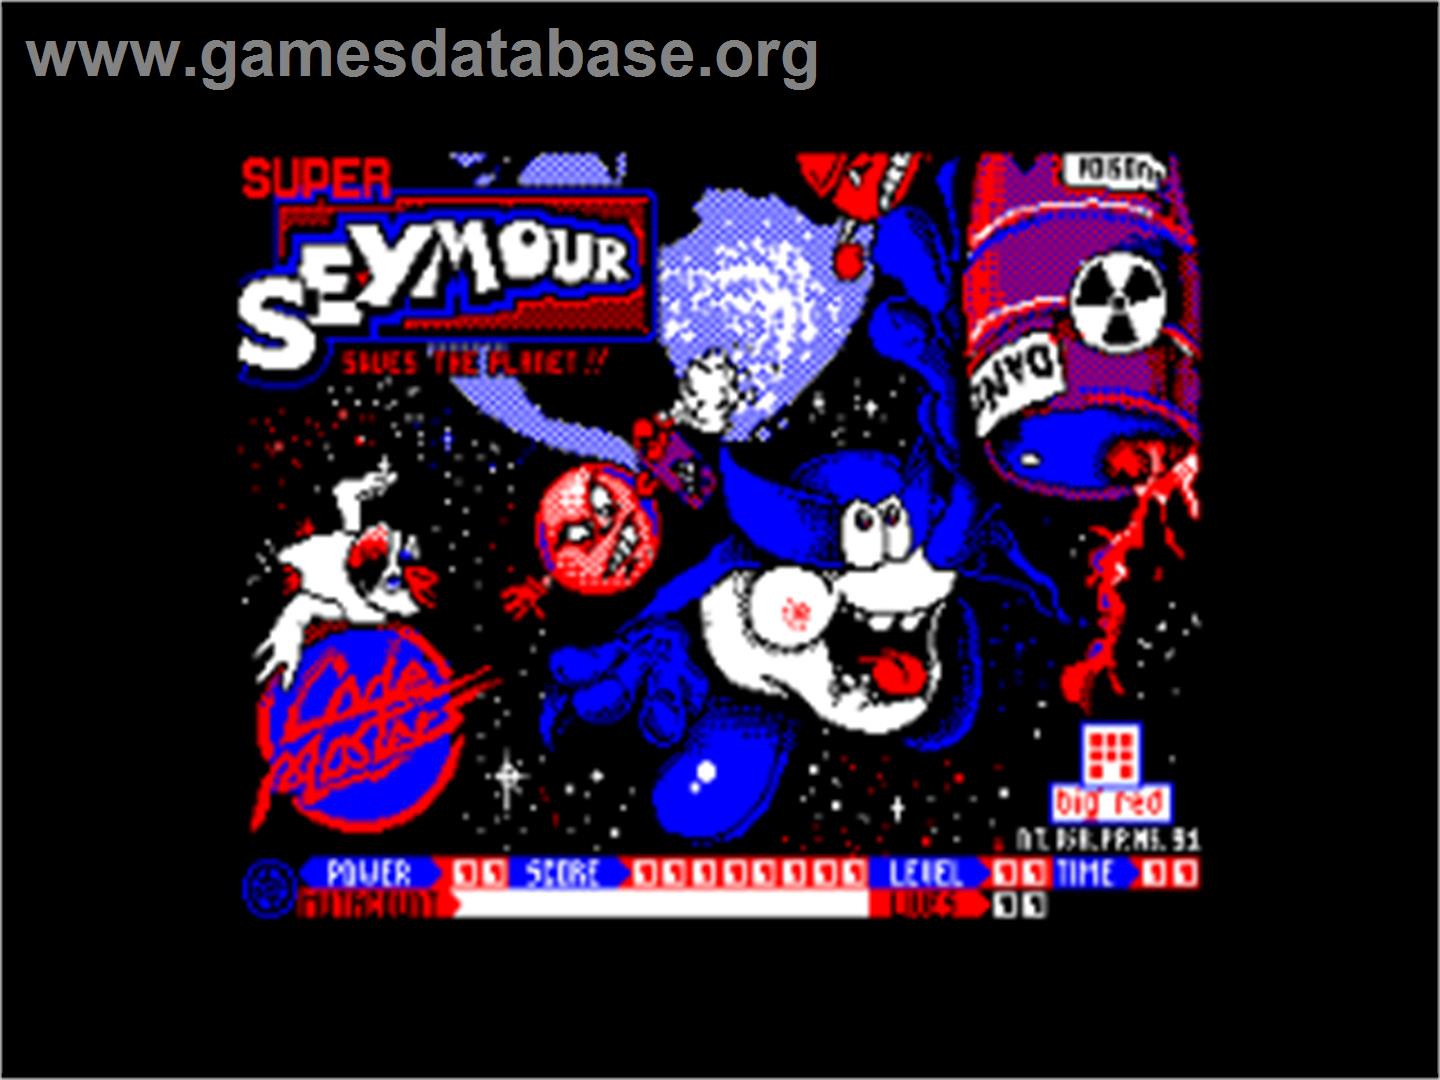 Super Seymour Saves the Planet - Amstrad CPC - Artwork - Title Screen